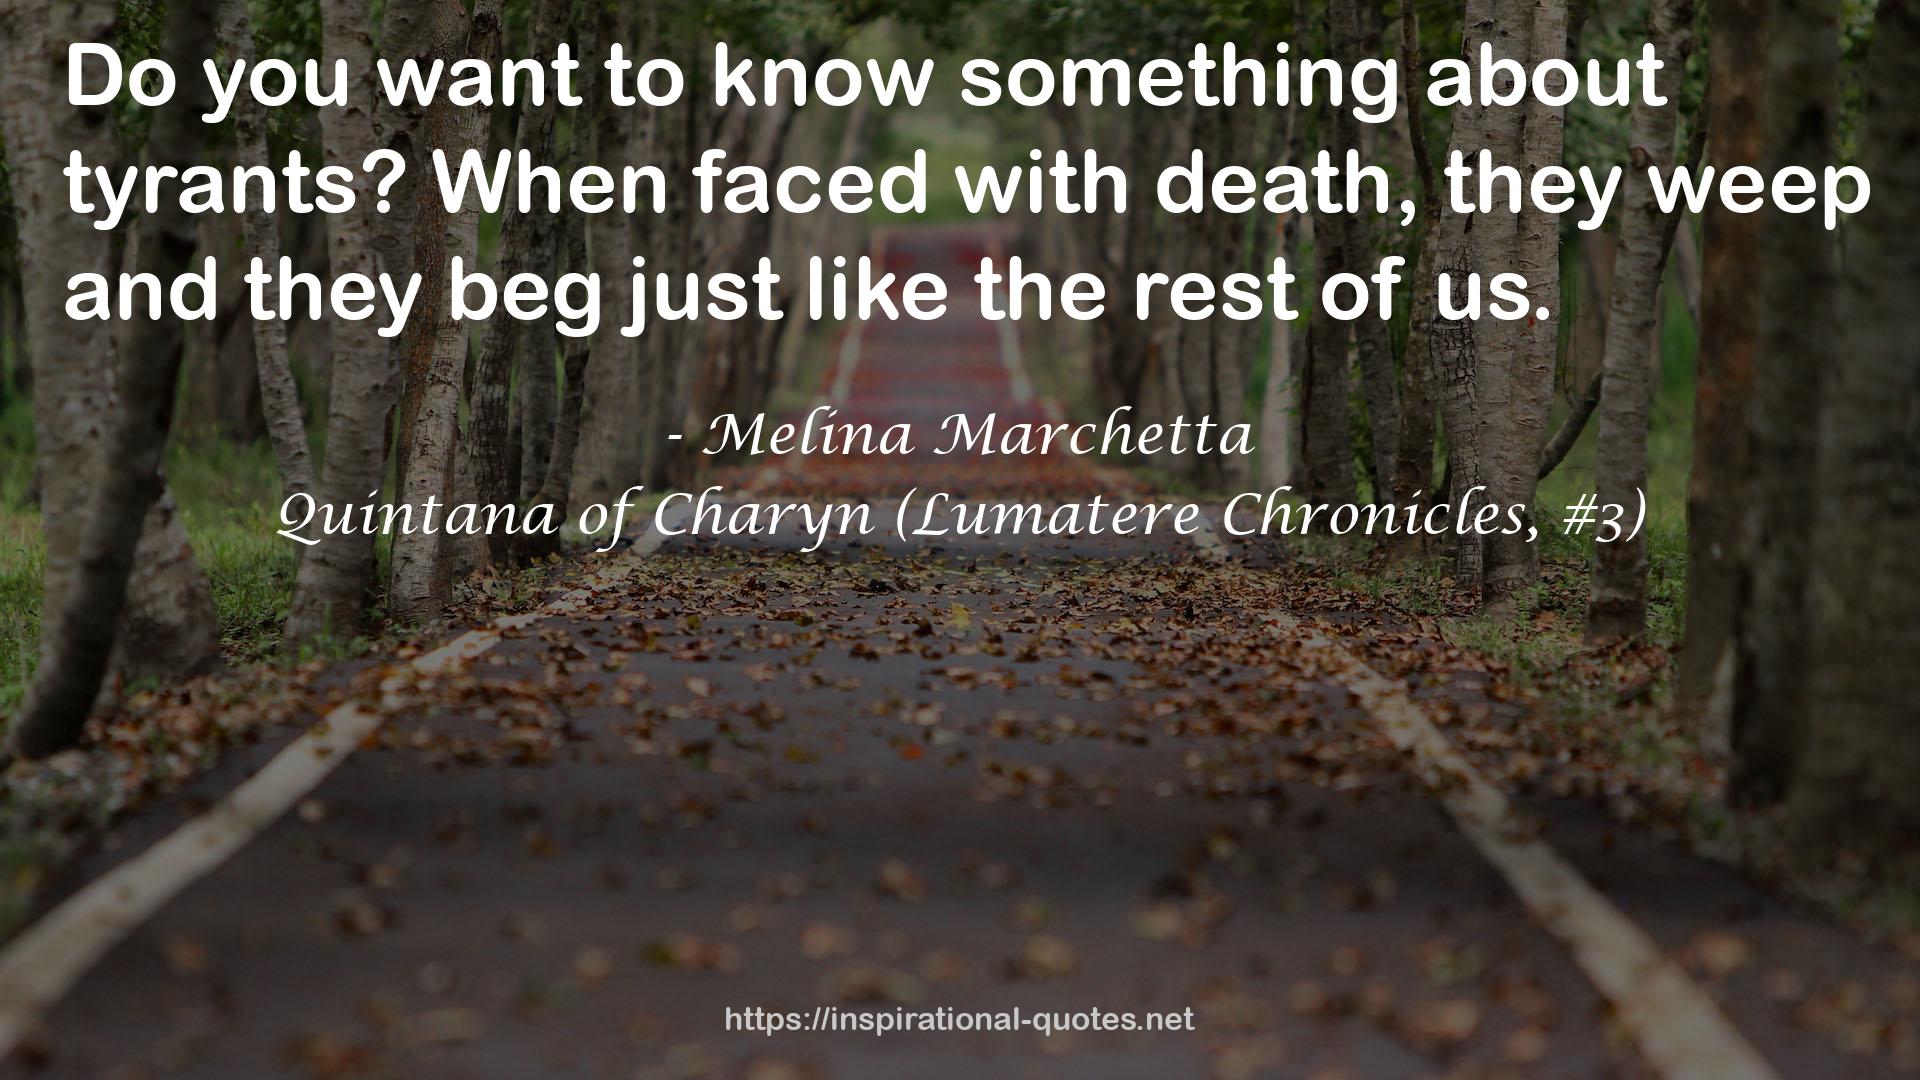 Quintana of Charyn (Lumatere Chronicles, #3) QUOTES